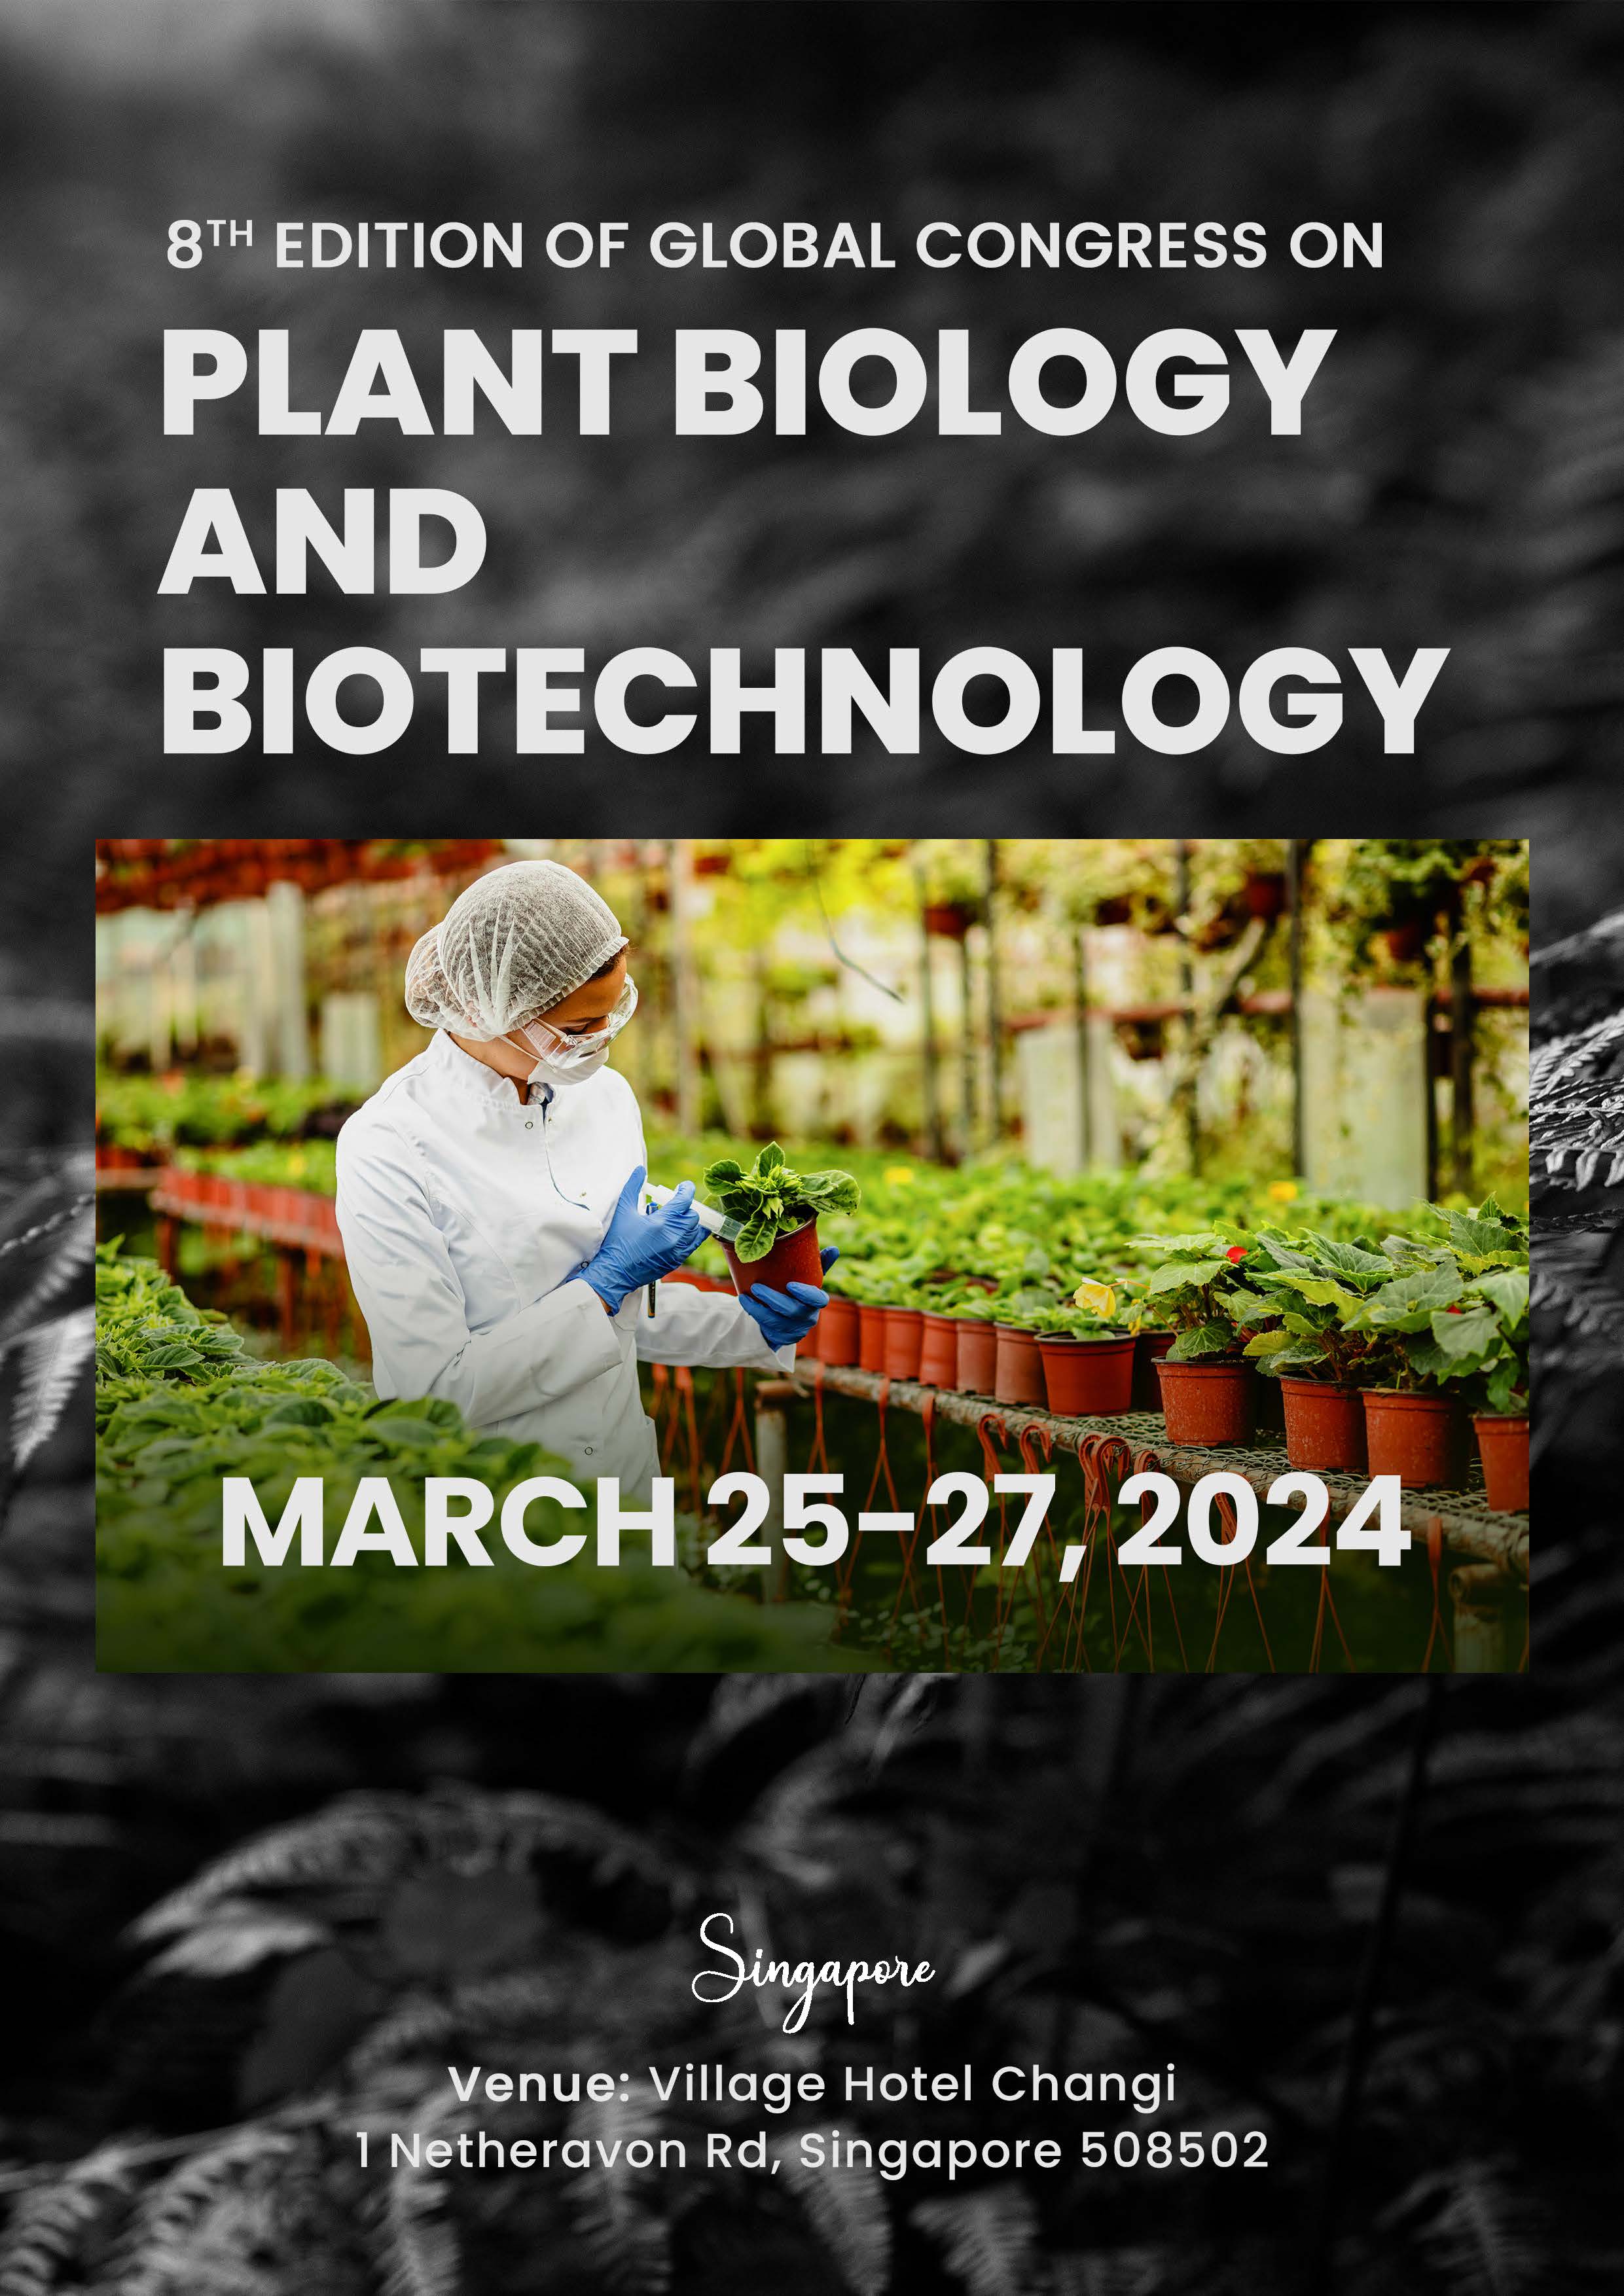 8th Edition of Global Congress on Plant Biology and Biotechnology | Singapore Book